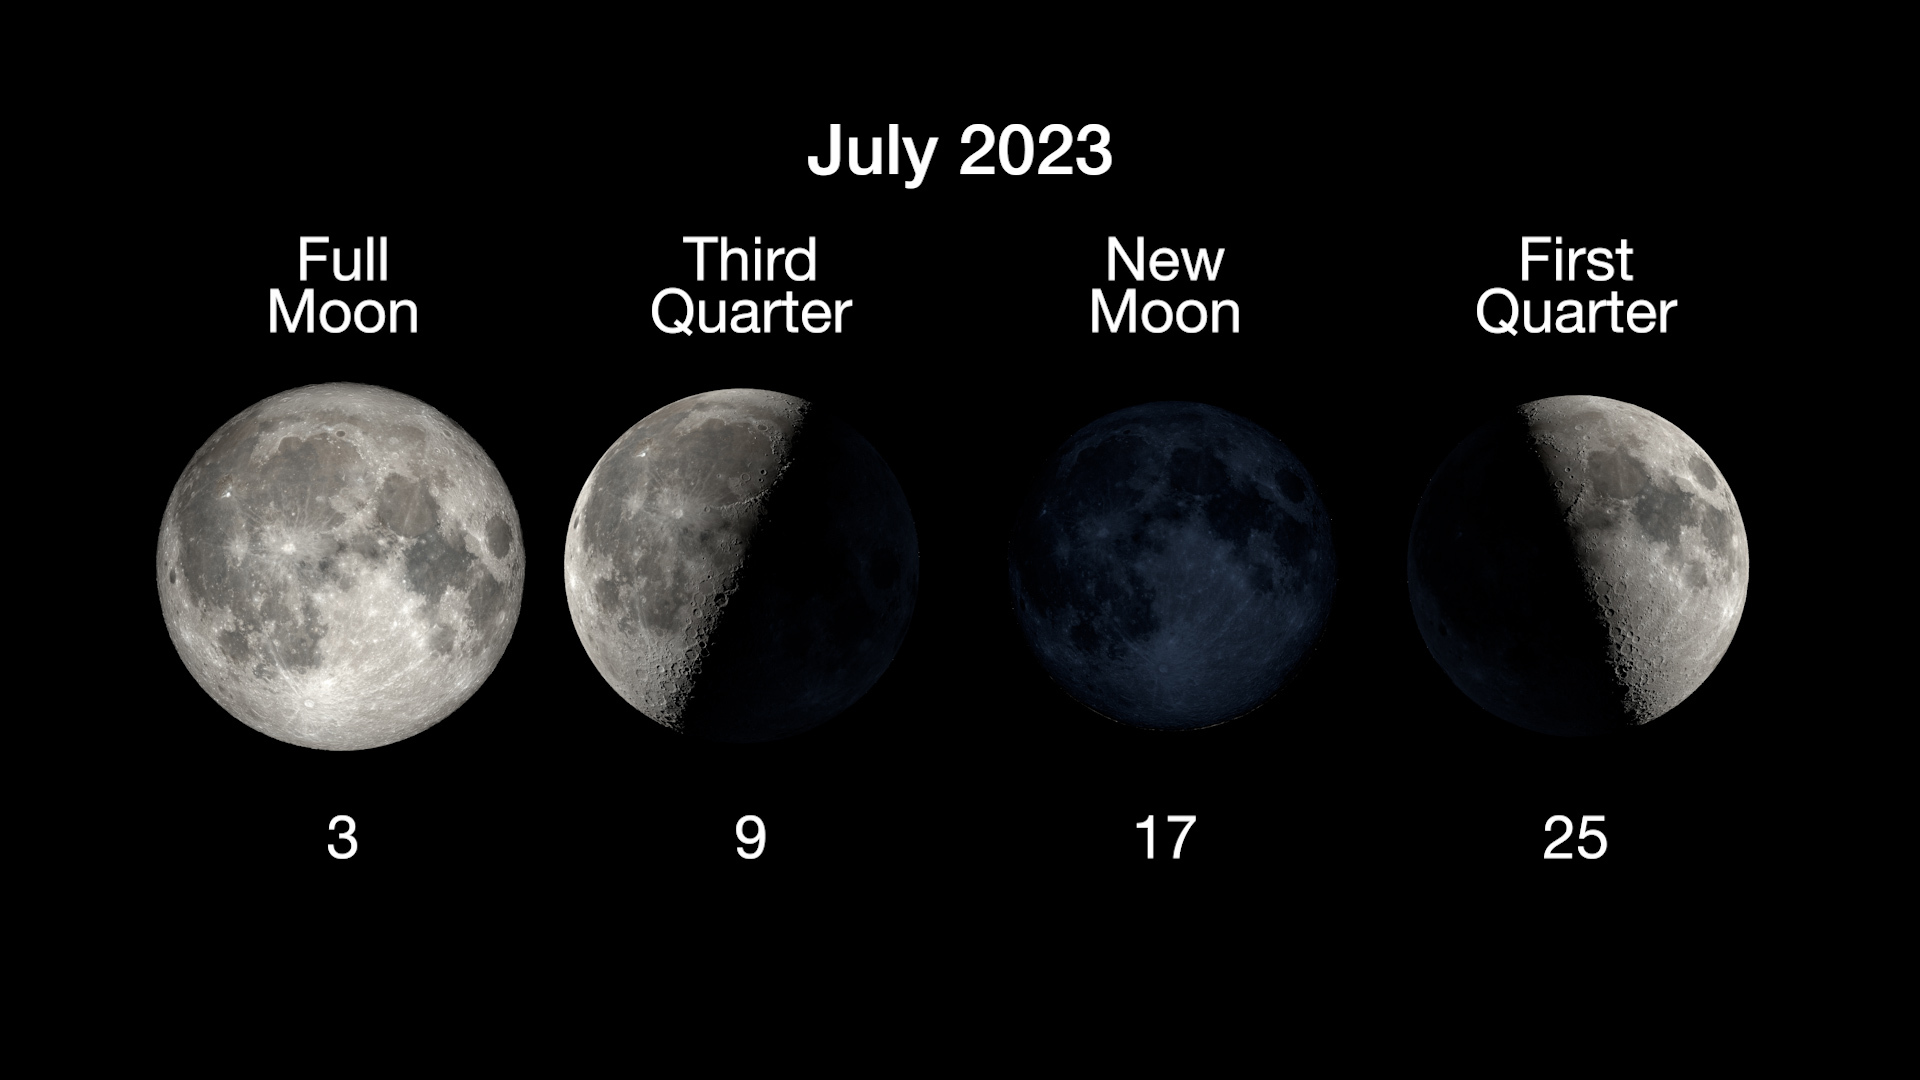 The four main phases of the Moon are illustrated in a horizontal row,  with the full moon on July 3, third quarter on July 10, new moon on July 18, and first quarter on July 26. 